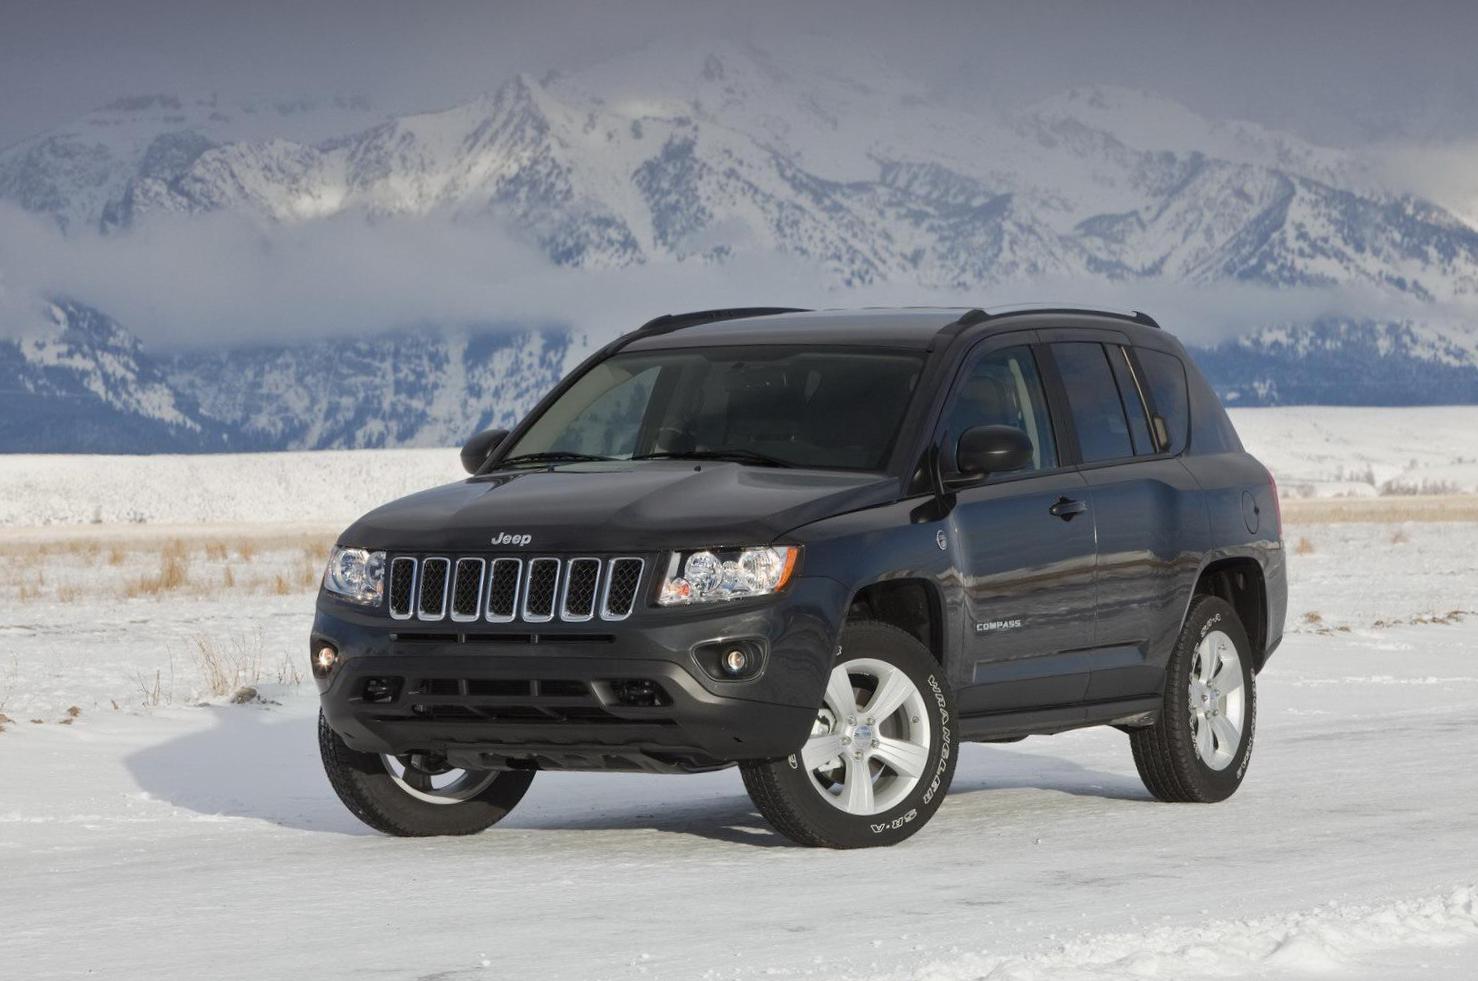 Compass Jeep approved 2011